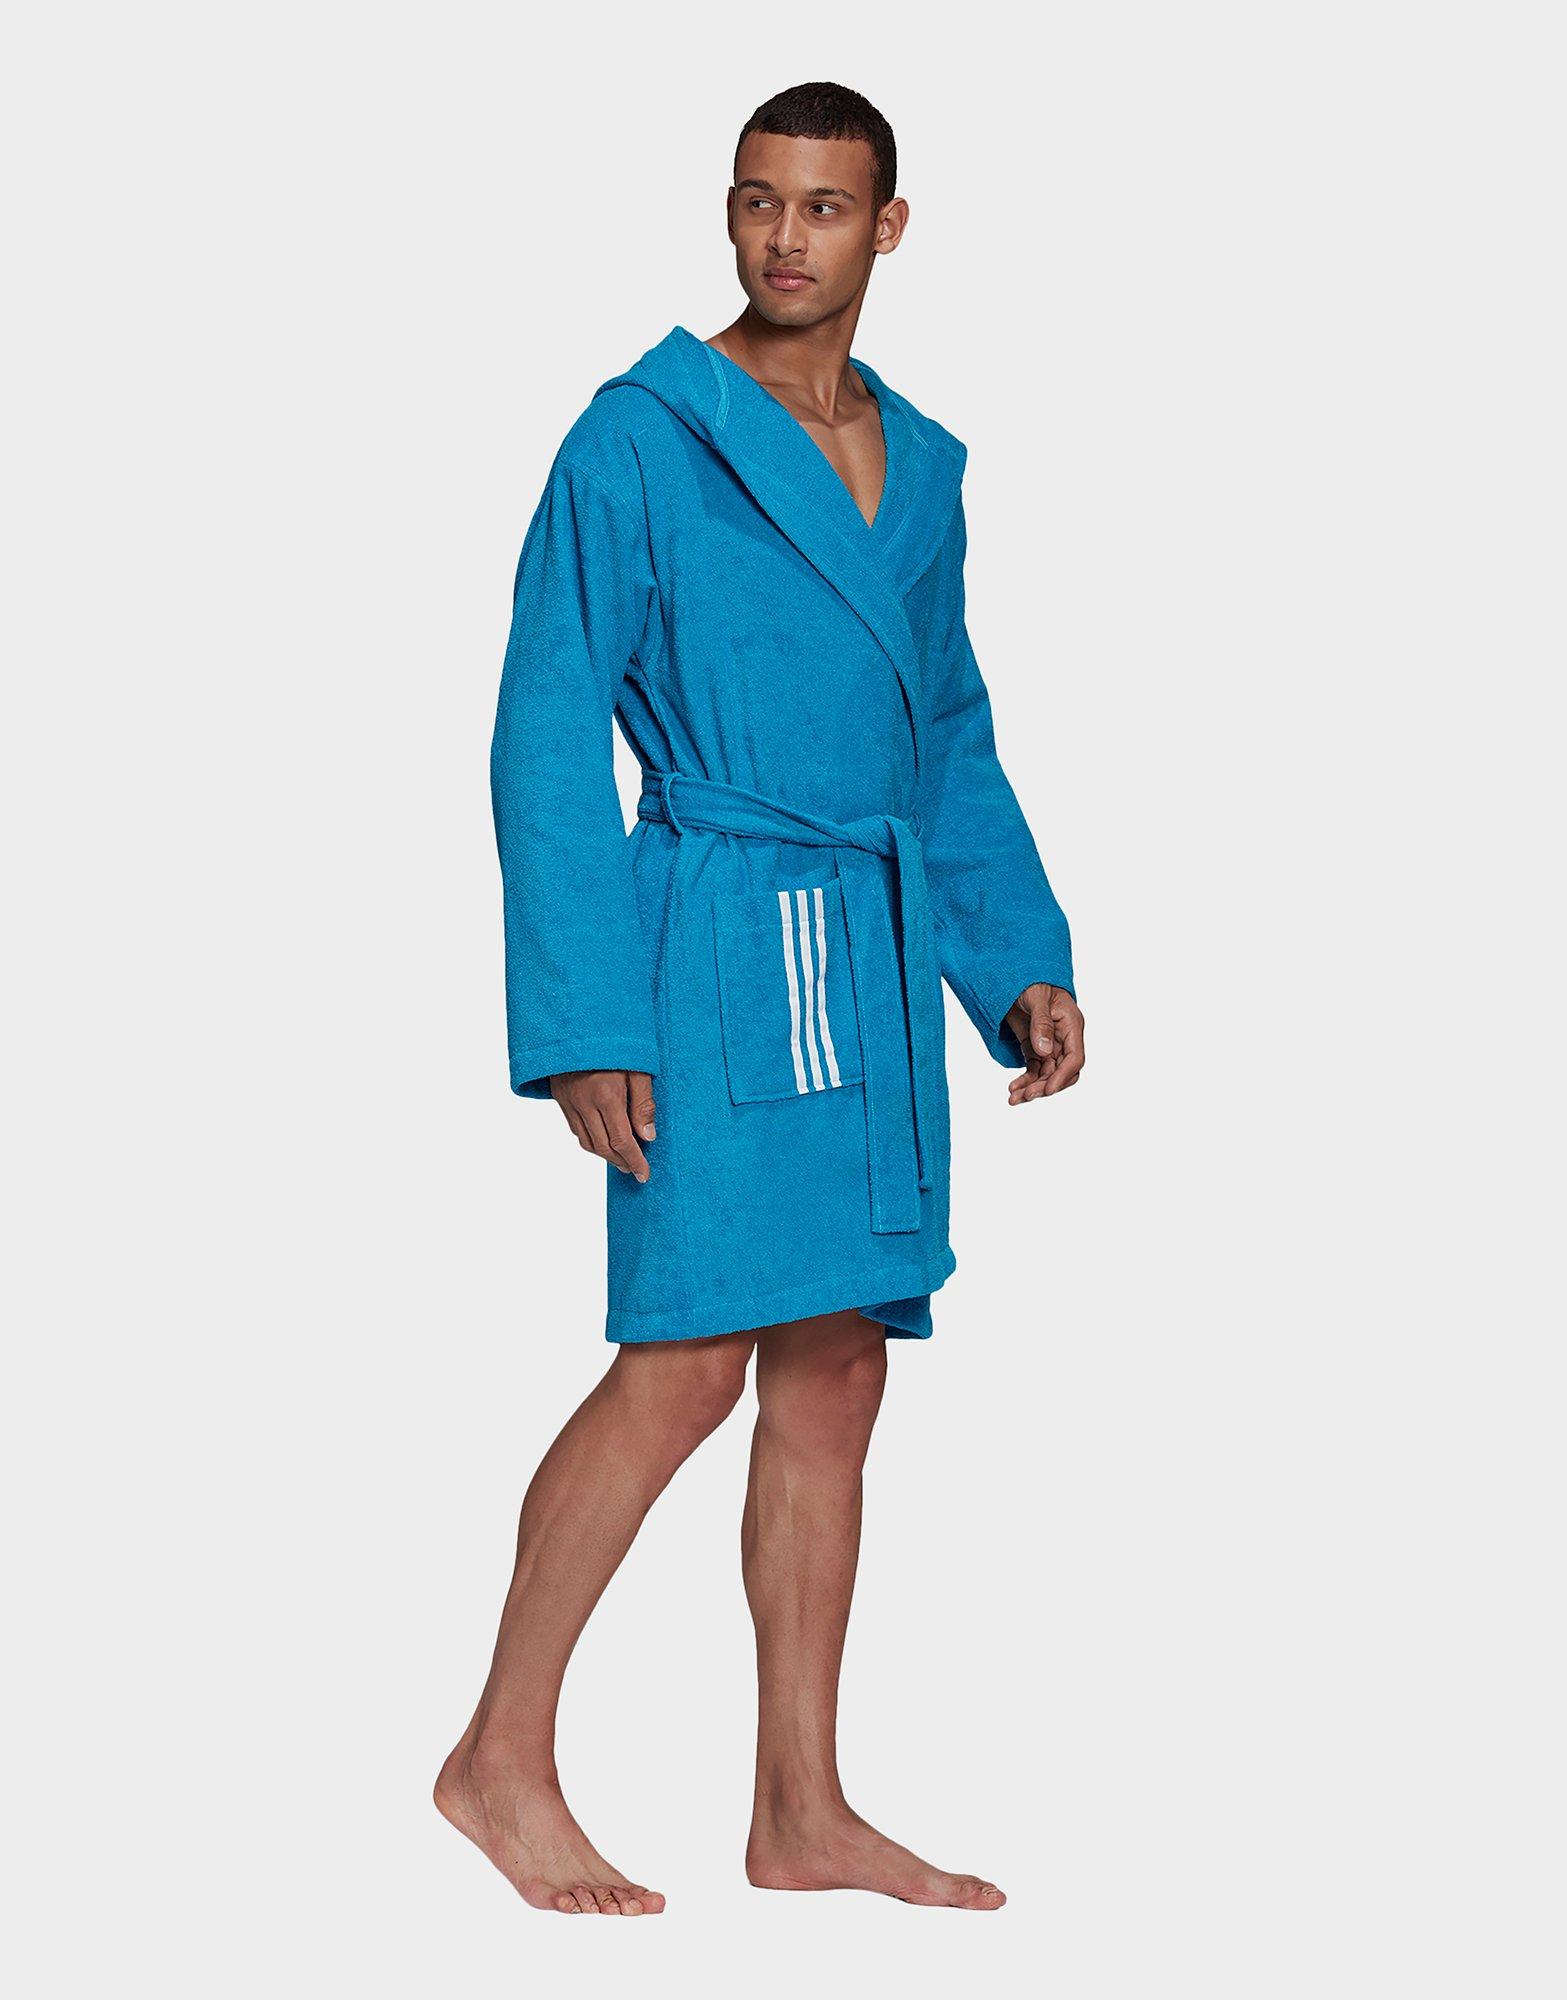 mens adidas dressing gown